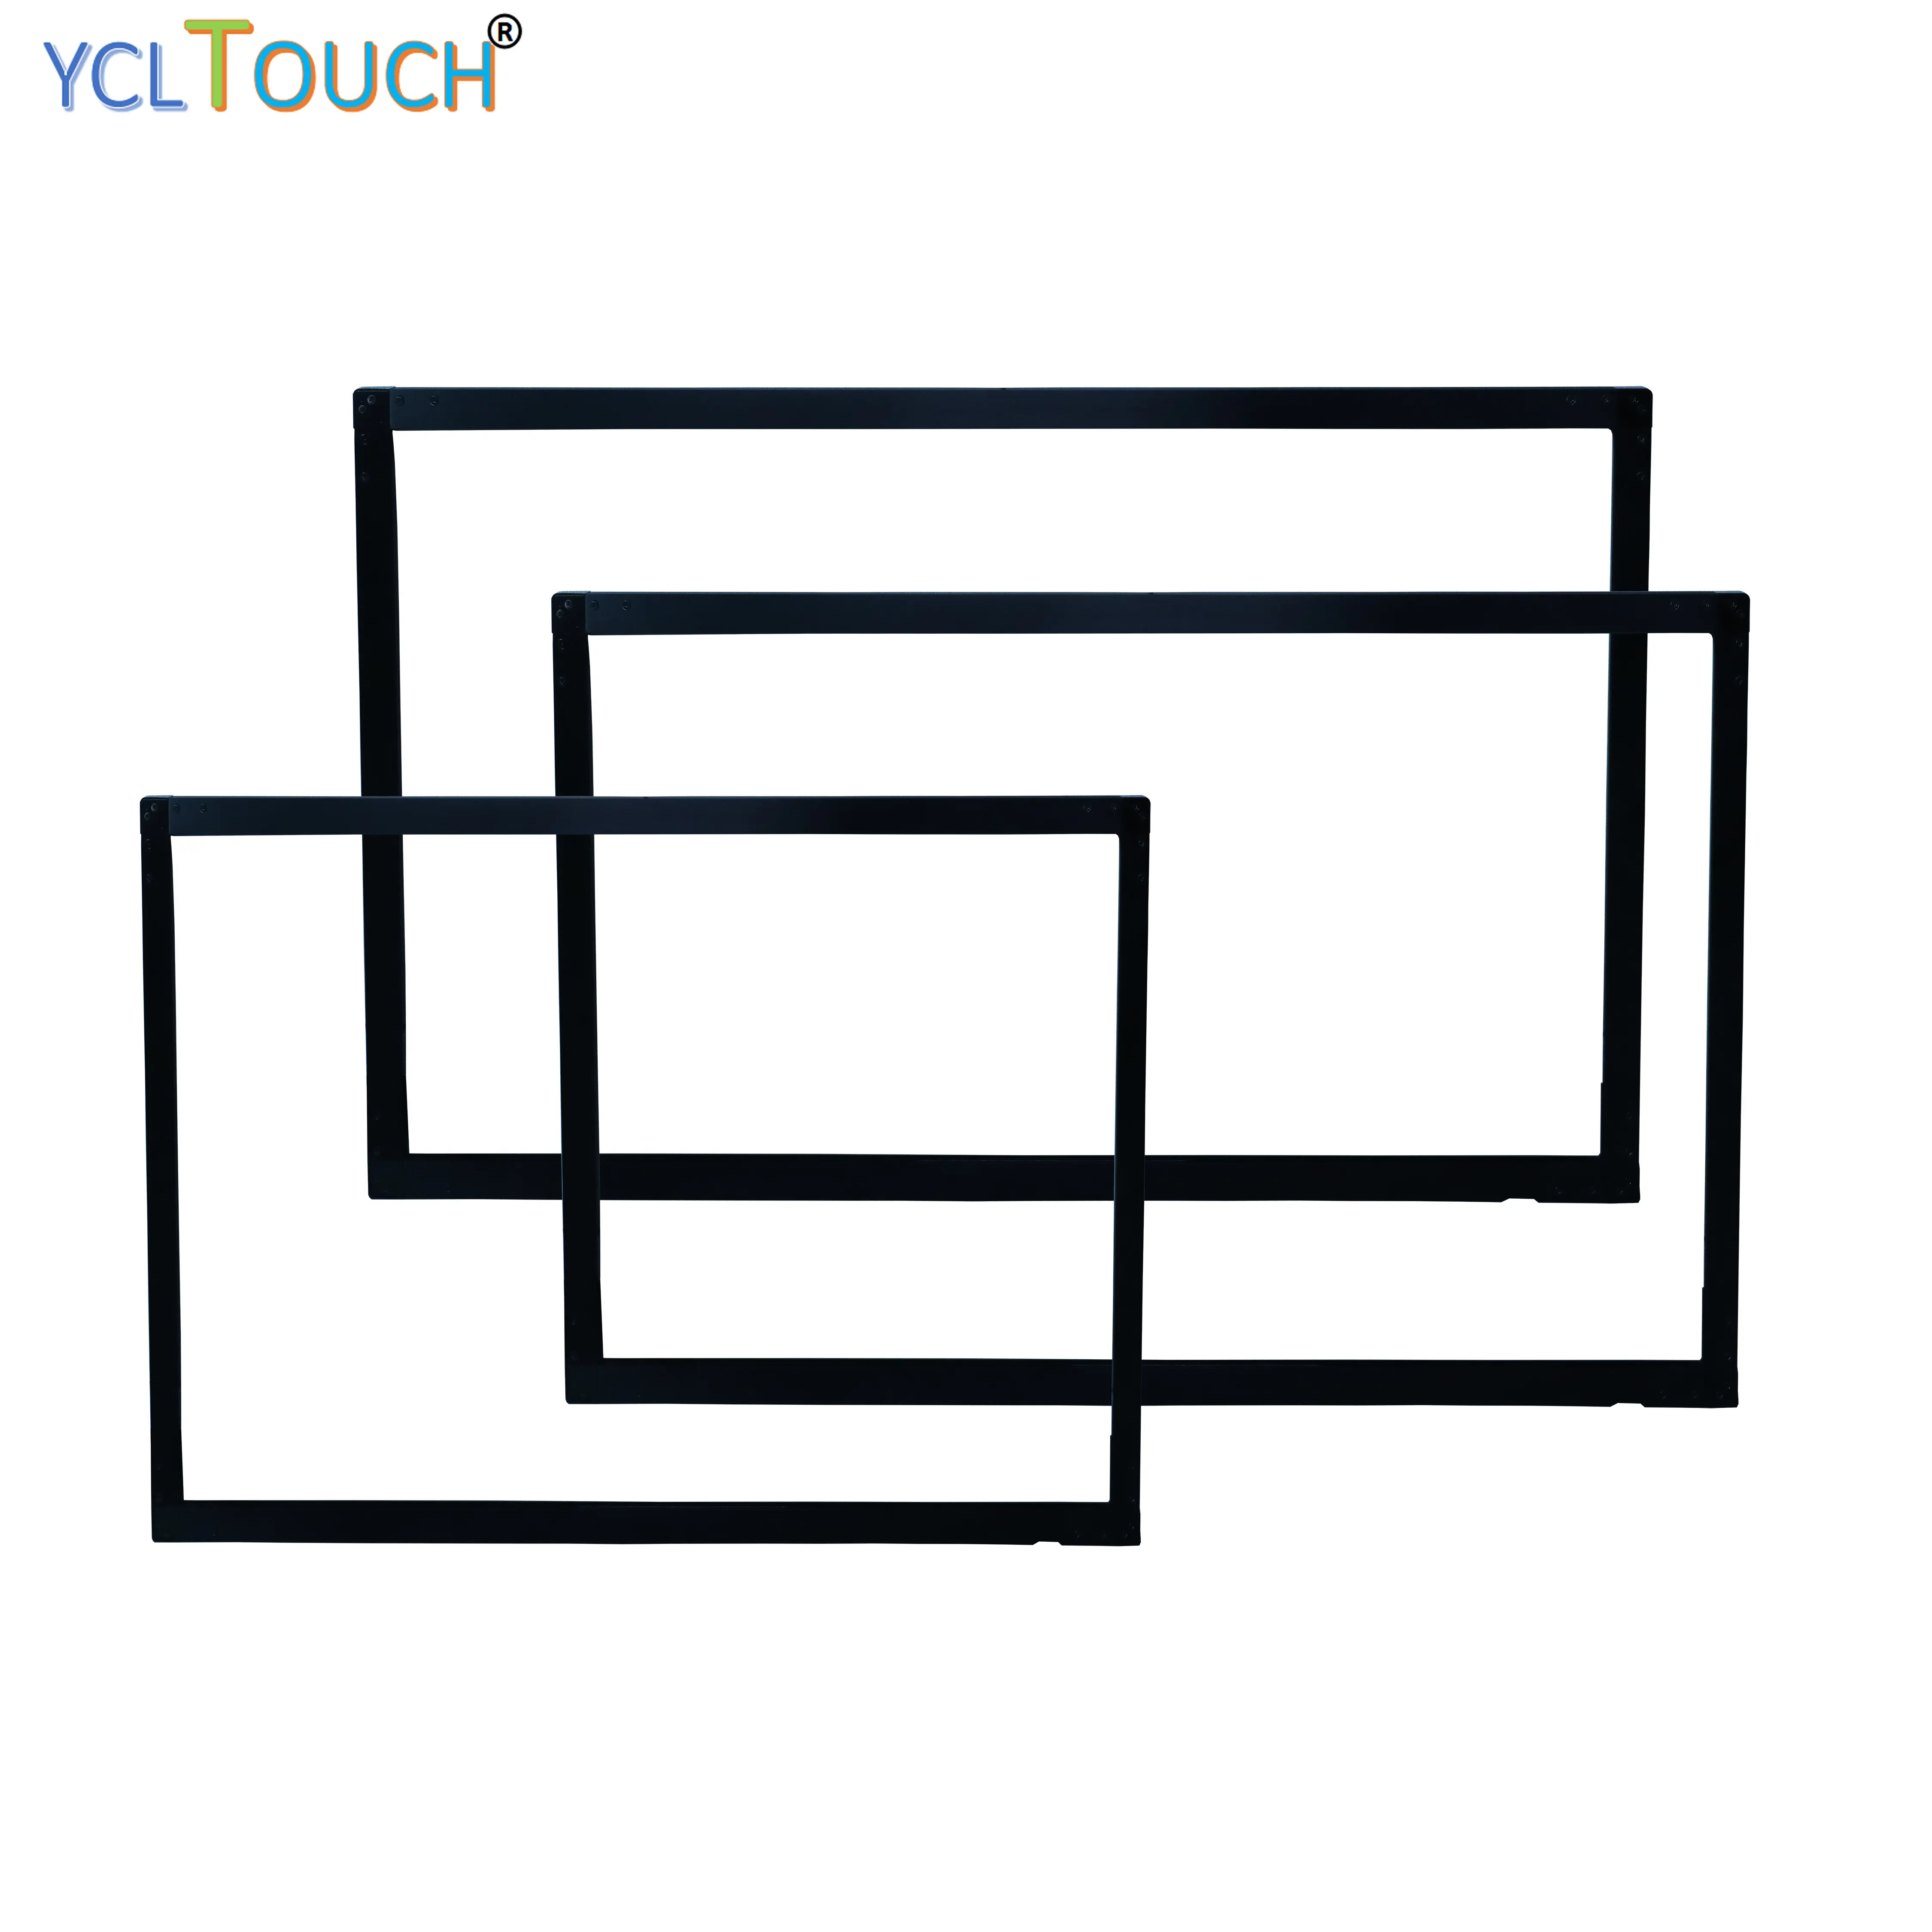 YCLTOUCH 49 inch aluminum alloy ir touch screen panel 40 touch points open frame  overlay kit